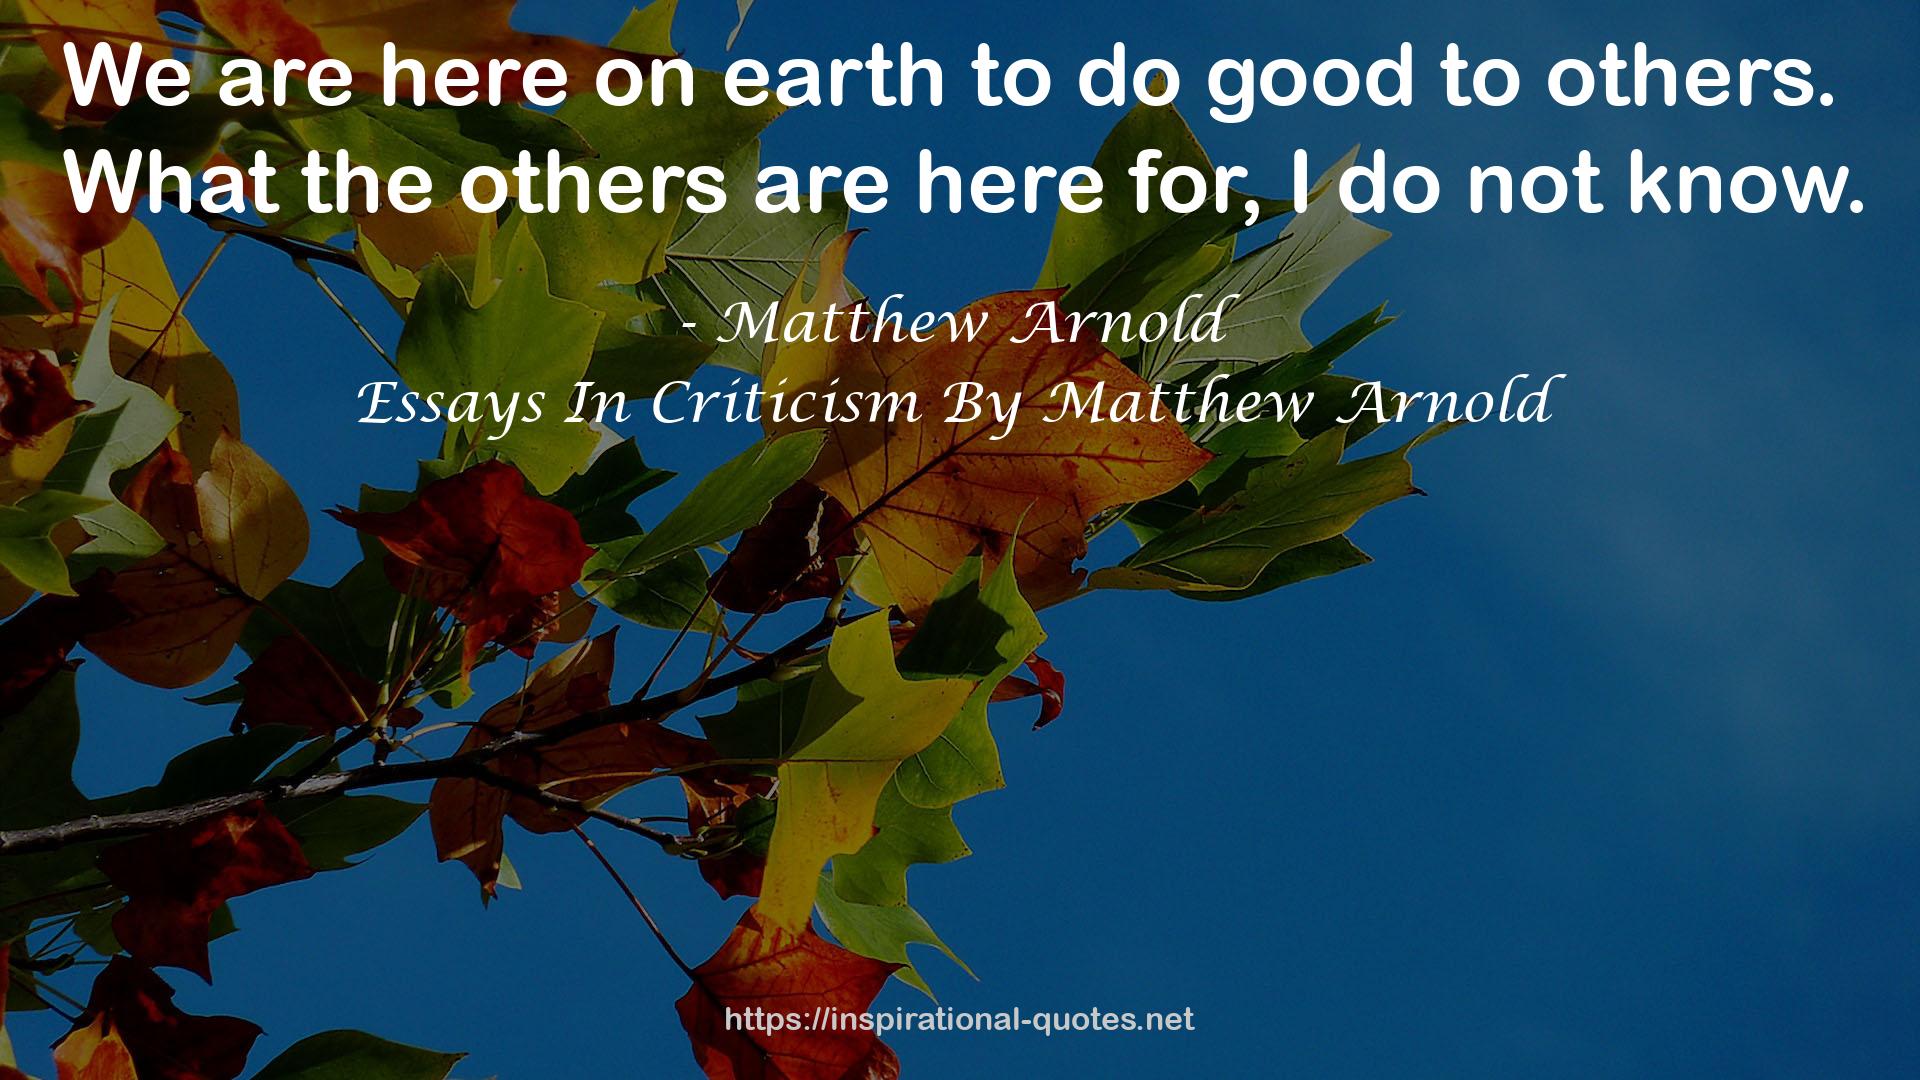 Essays In Criticism By Matthew Arnold QUOTES